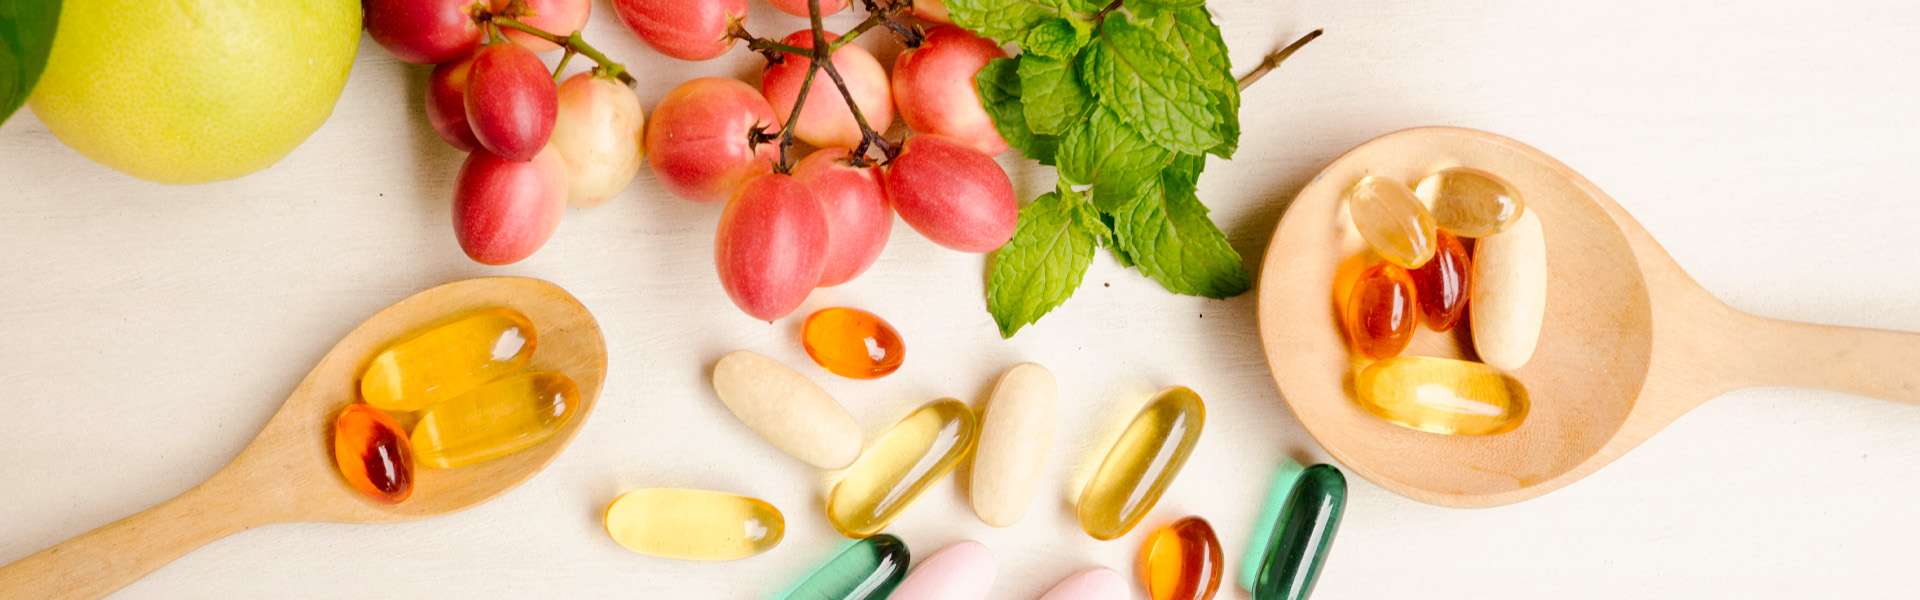 How to choose a multivitamin: a short practical guide